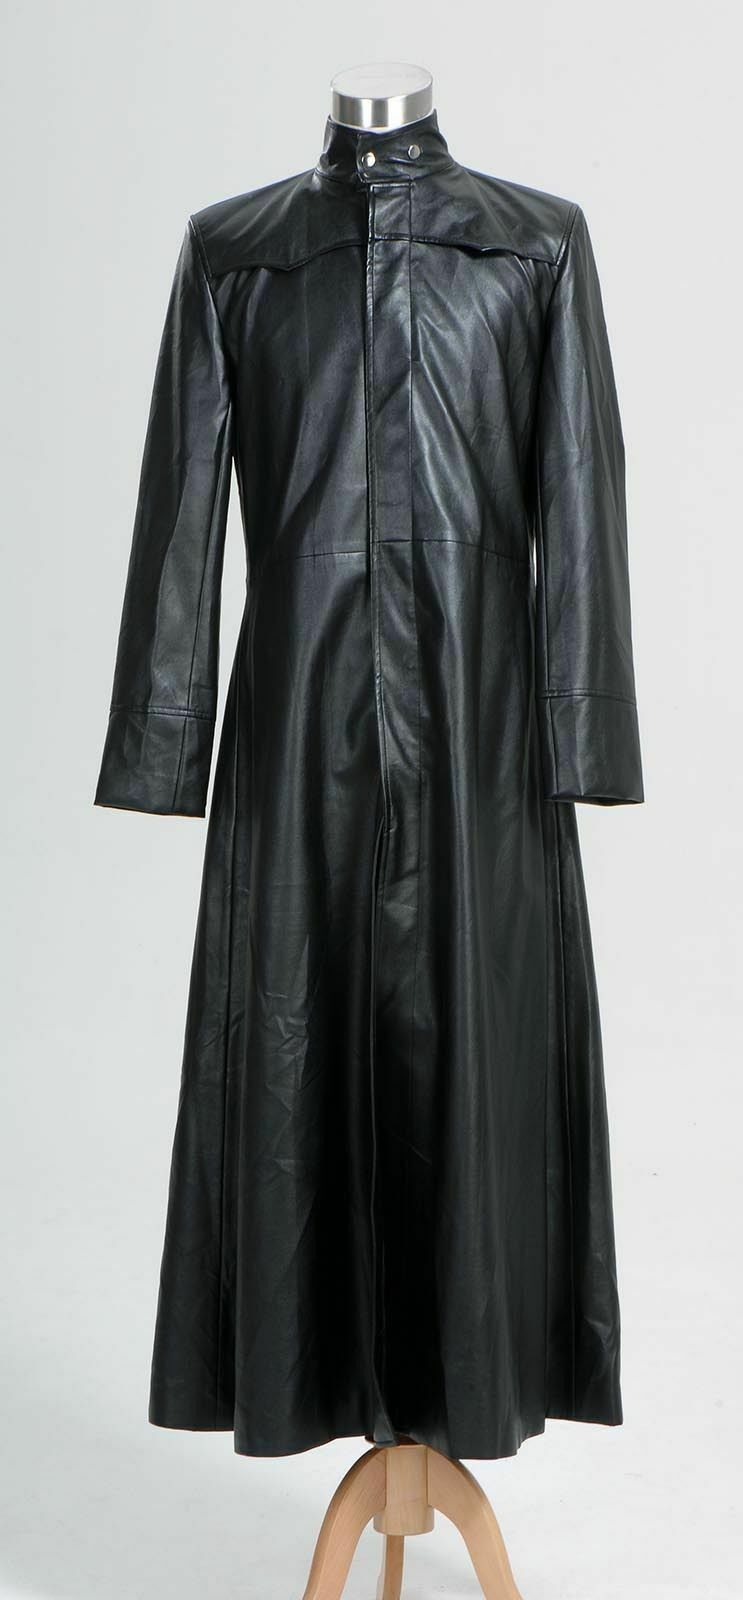 Neo Matrix Keanu Reeves Black SYNTHETIC Leather Trench Coat